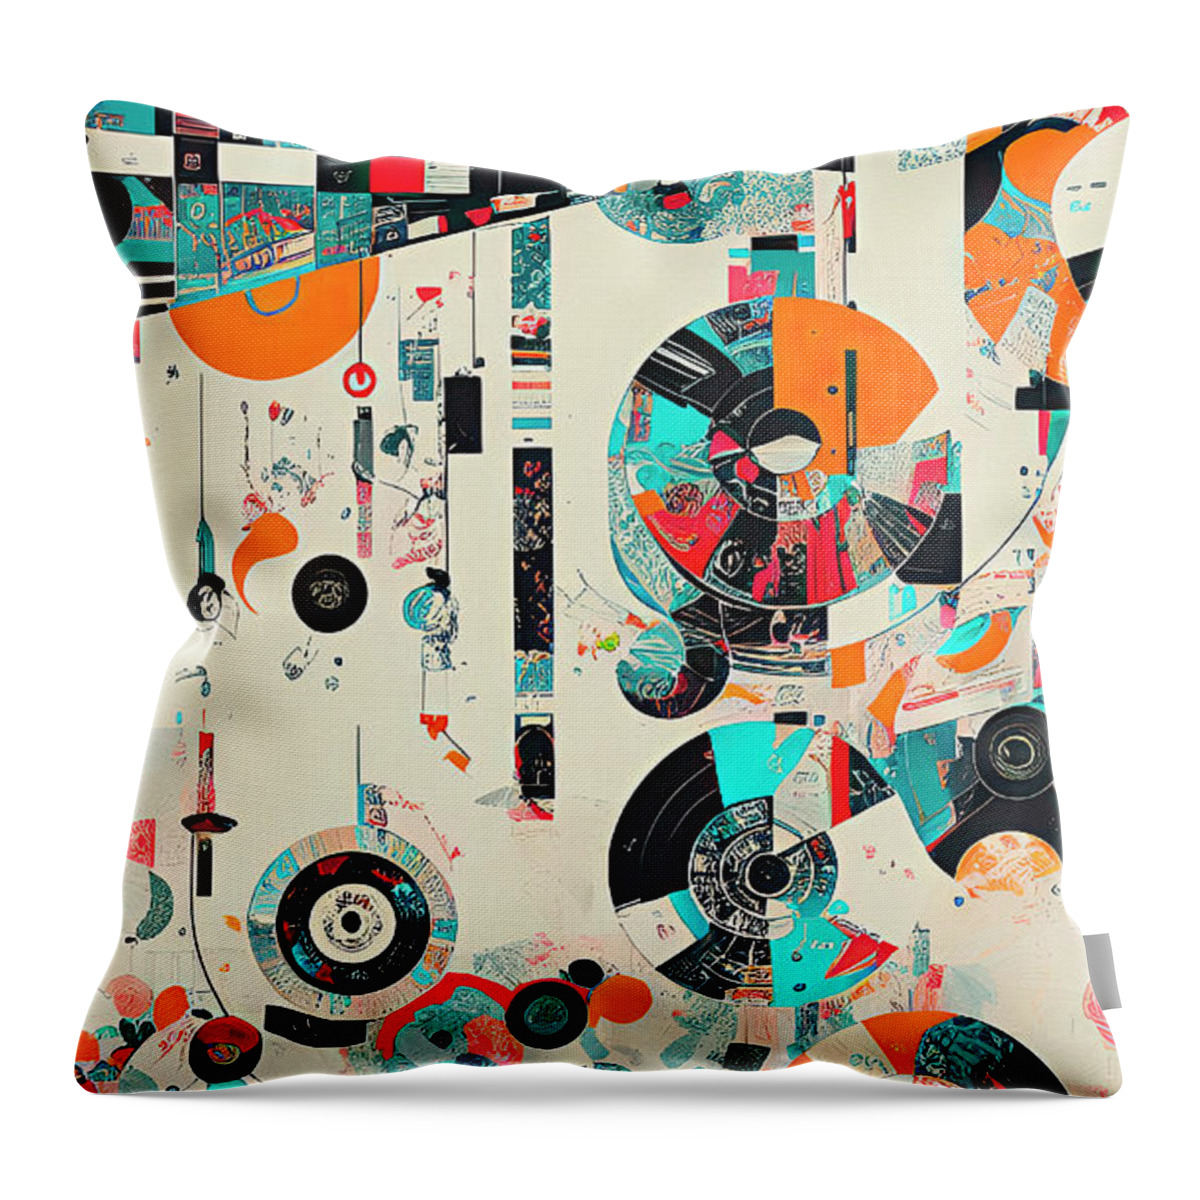 Abstract Vintage Music Throw Pillow featuring the digital art Music City Abstract Vinyl Records Vintage Modern Art by Ginette Callaway